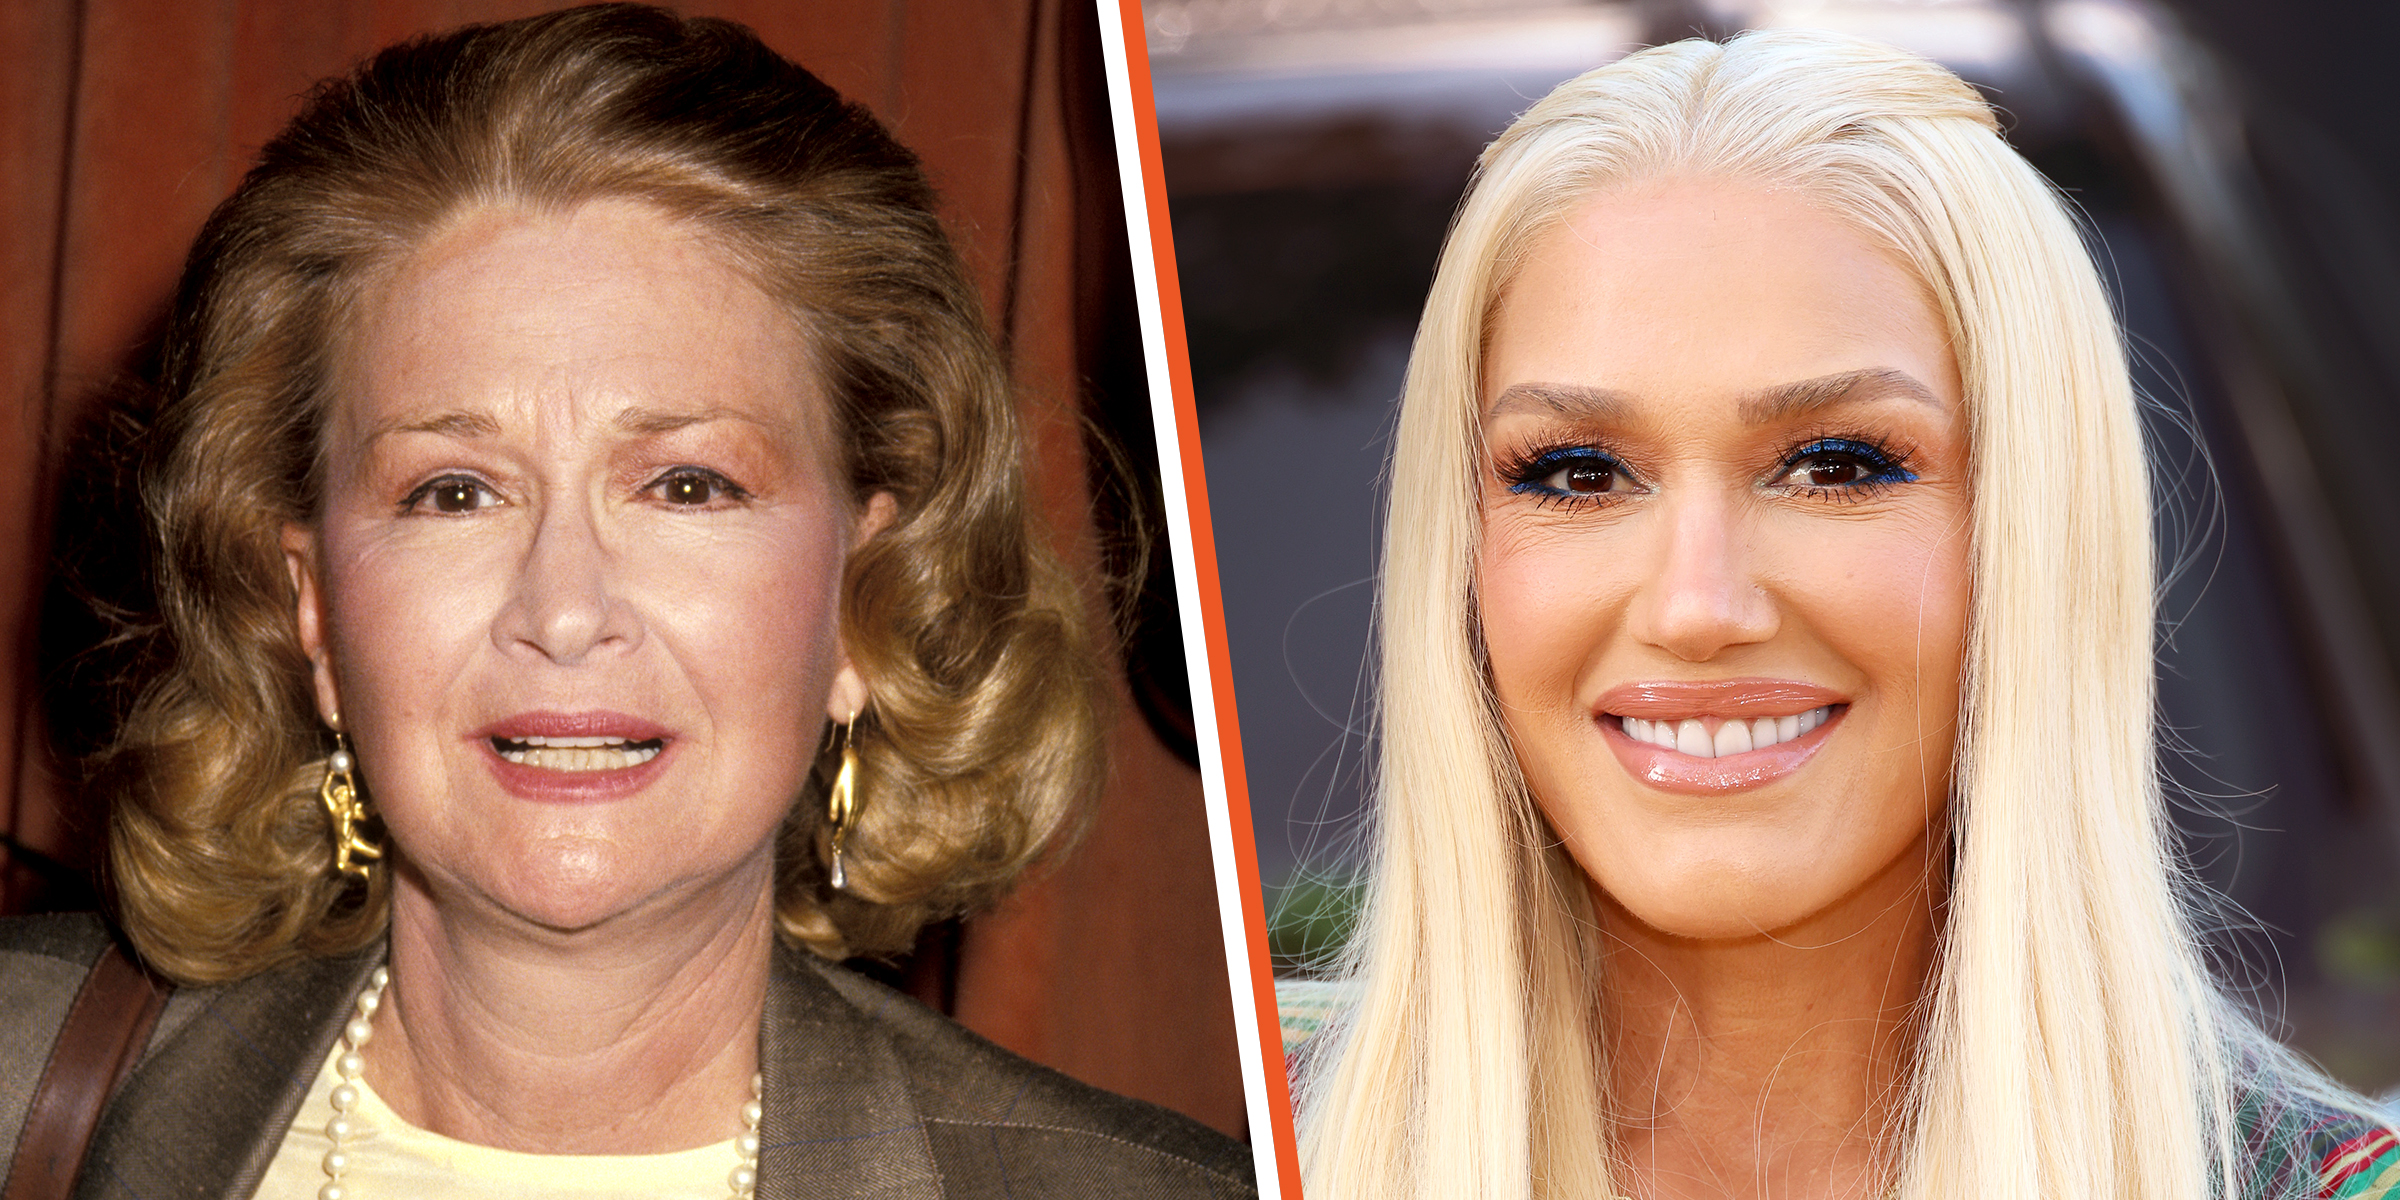 Diane Ladd and Gwen Stefani in their 50s | Source: Getty Images